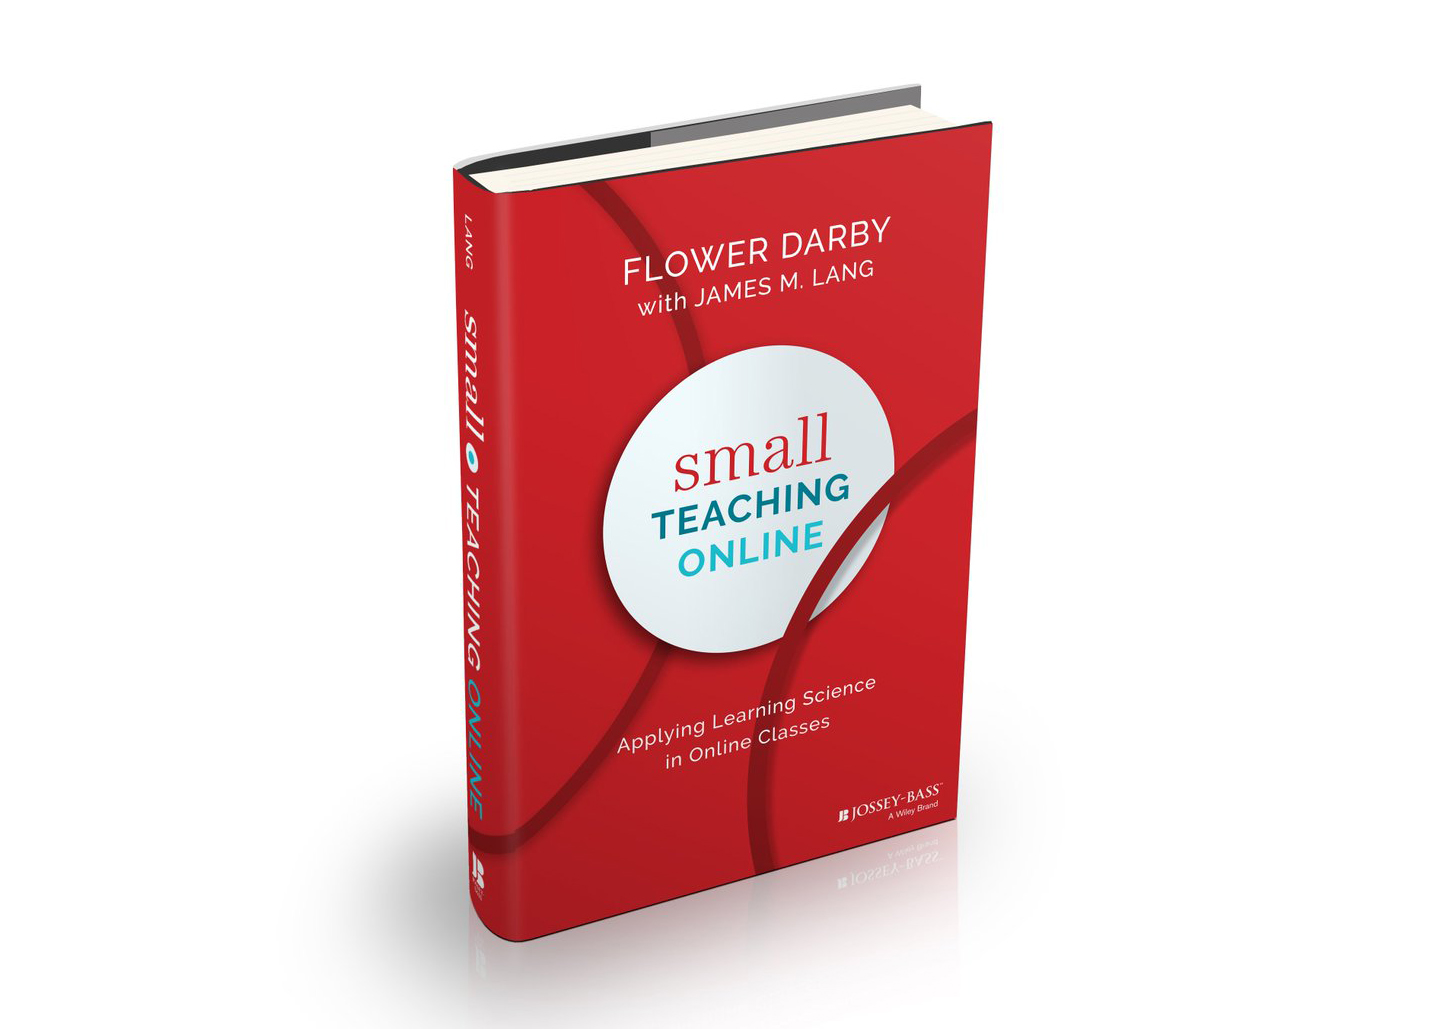 The inaugural series of #SmallBitesRead focuses on the book Small Teaching Online: Applying learning science in online classes by Flower Darby and James Lang.   